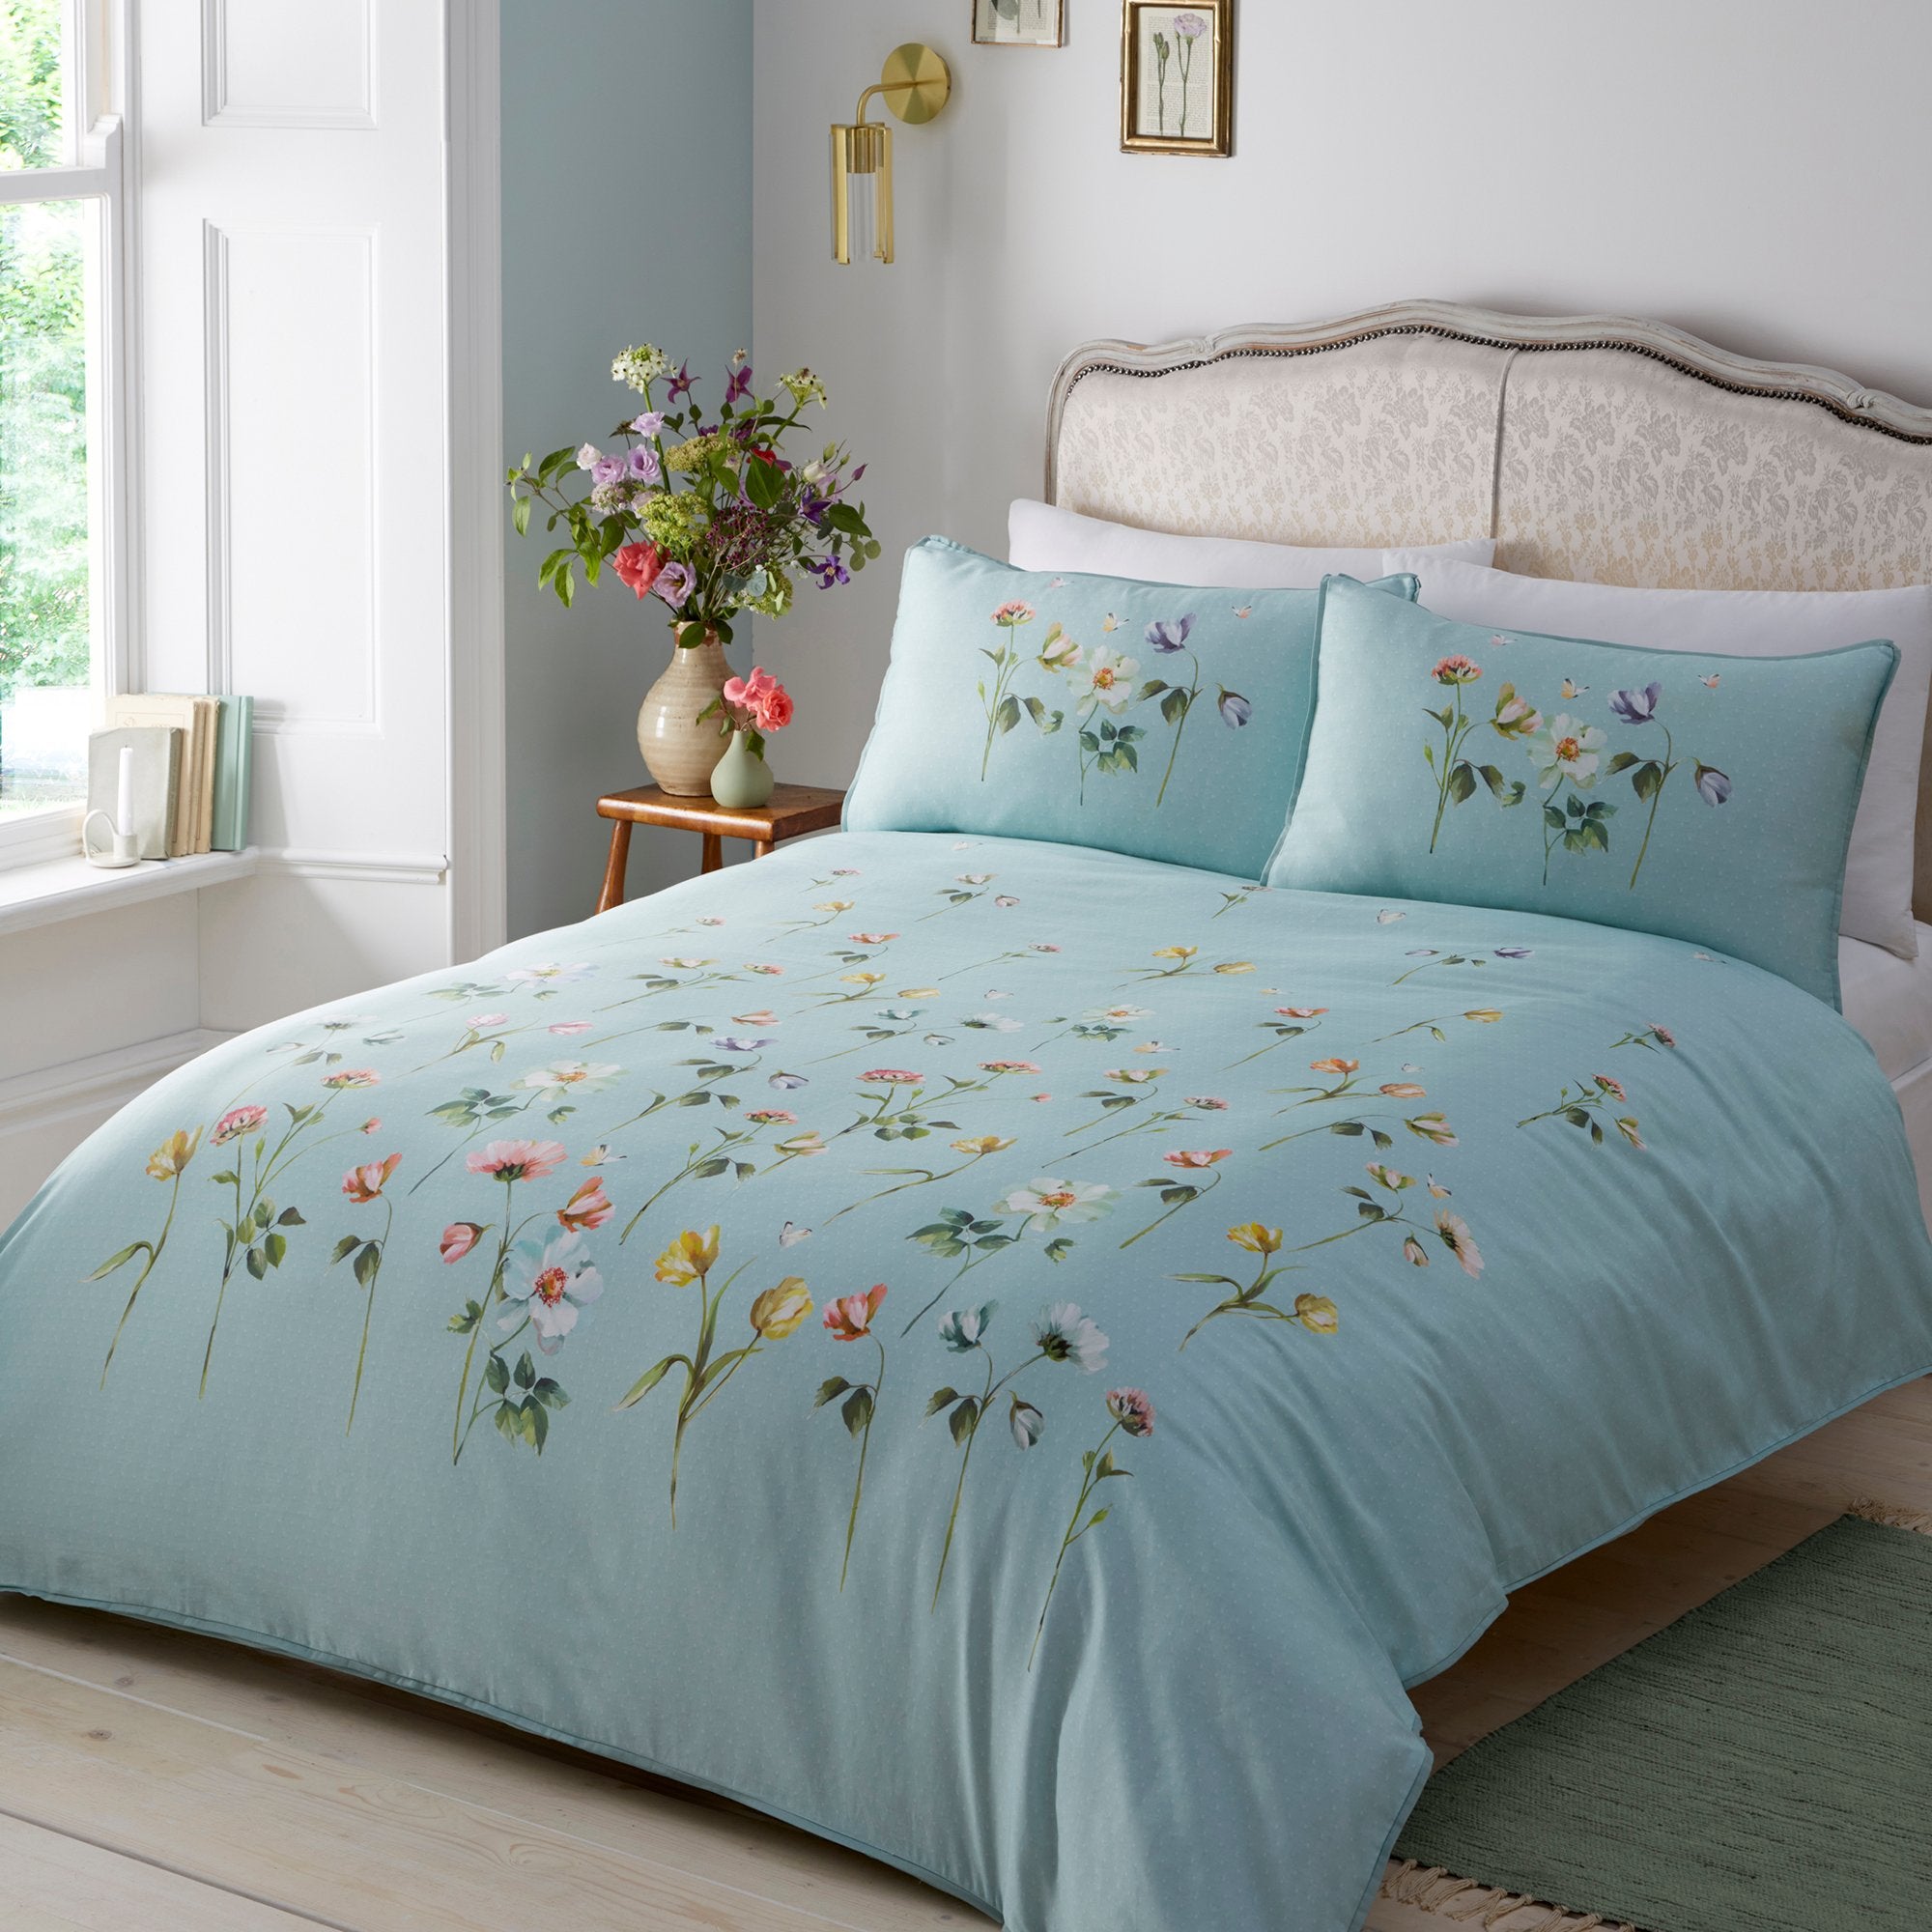 Duvet Cover Set Serenity by Appletree Heritage in Duck Egg